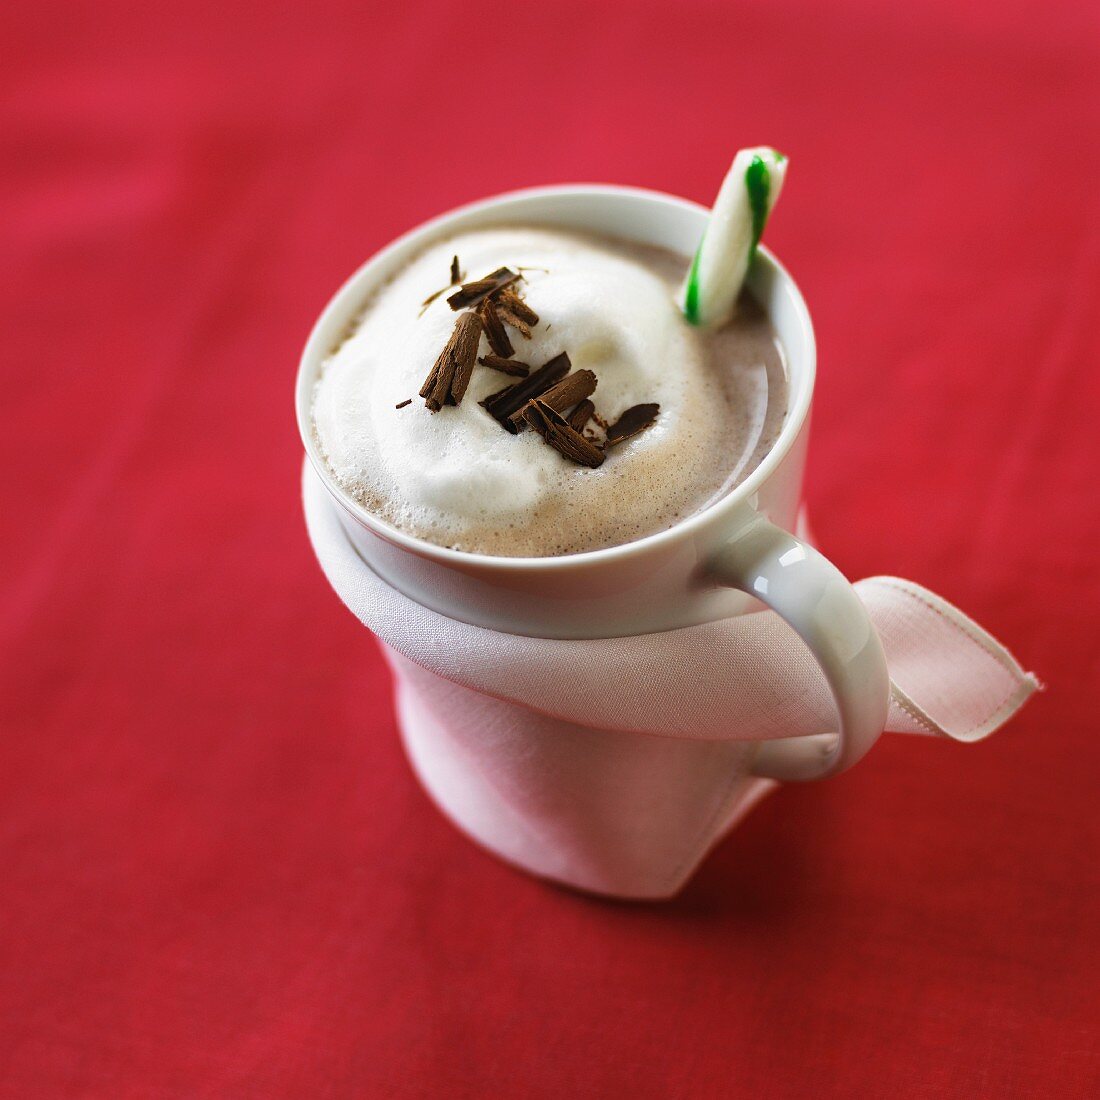 A mug of hot chocolate with milk foamy, grated chocolate and a candy cane